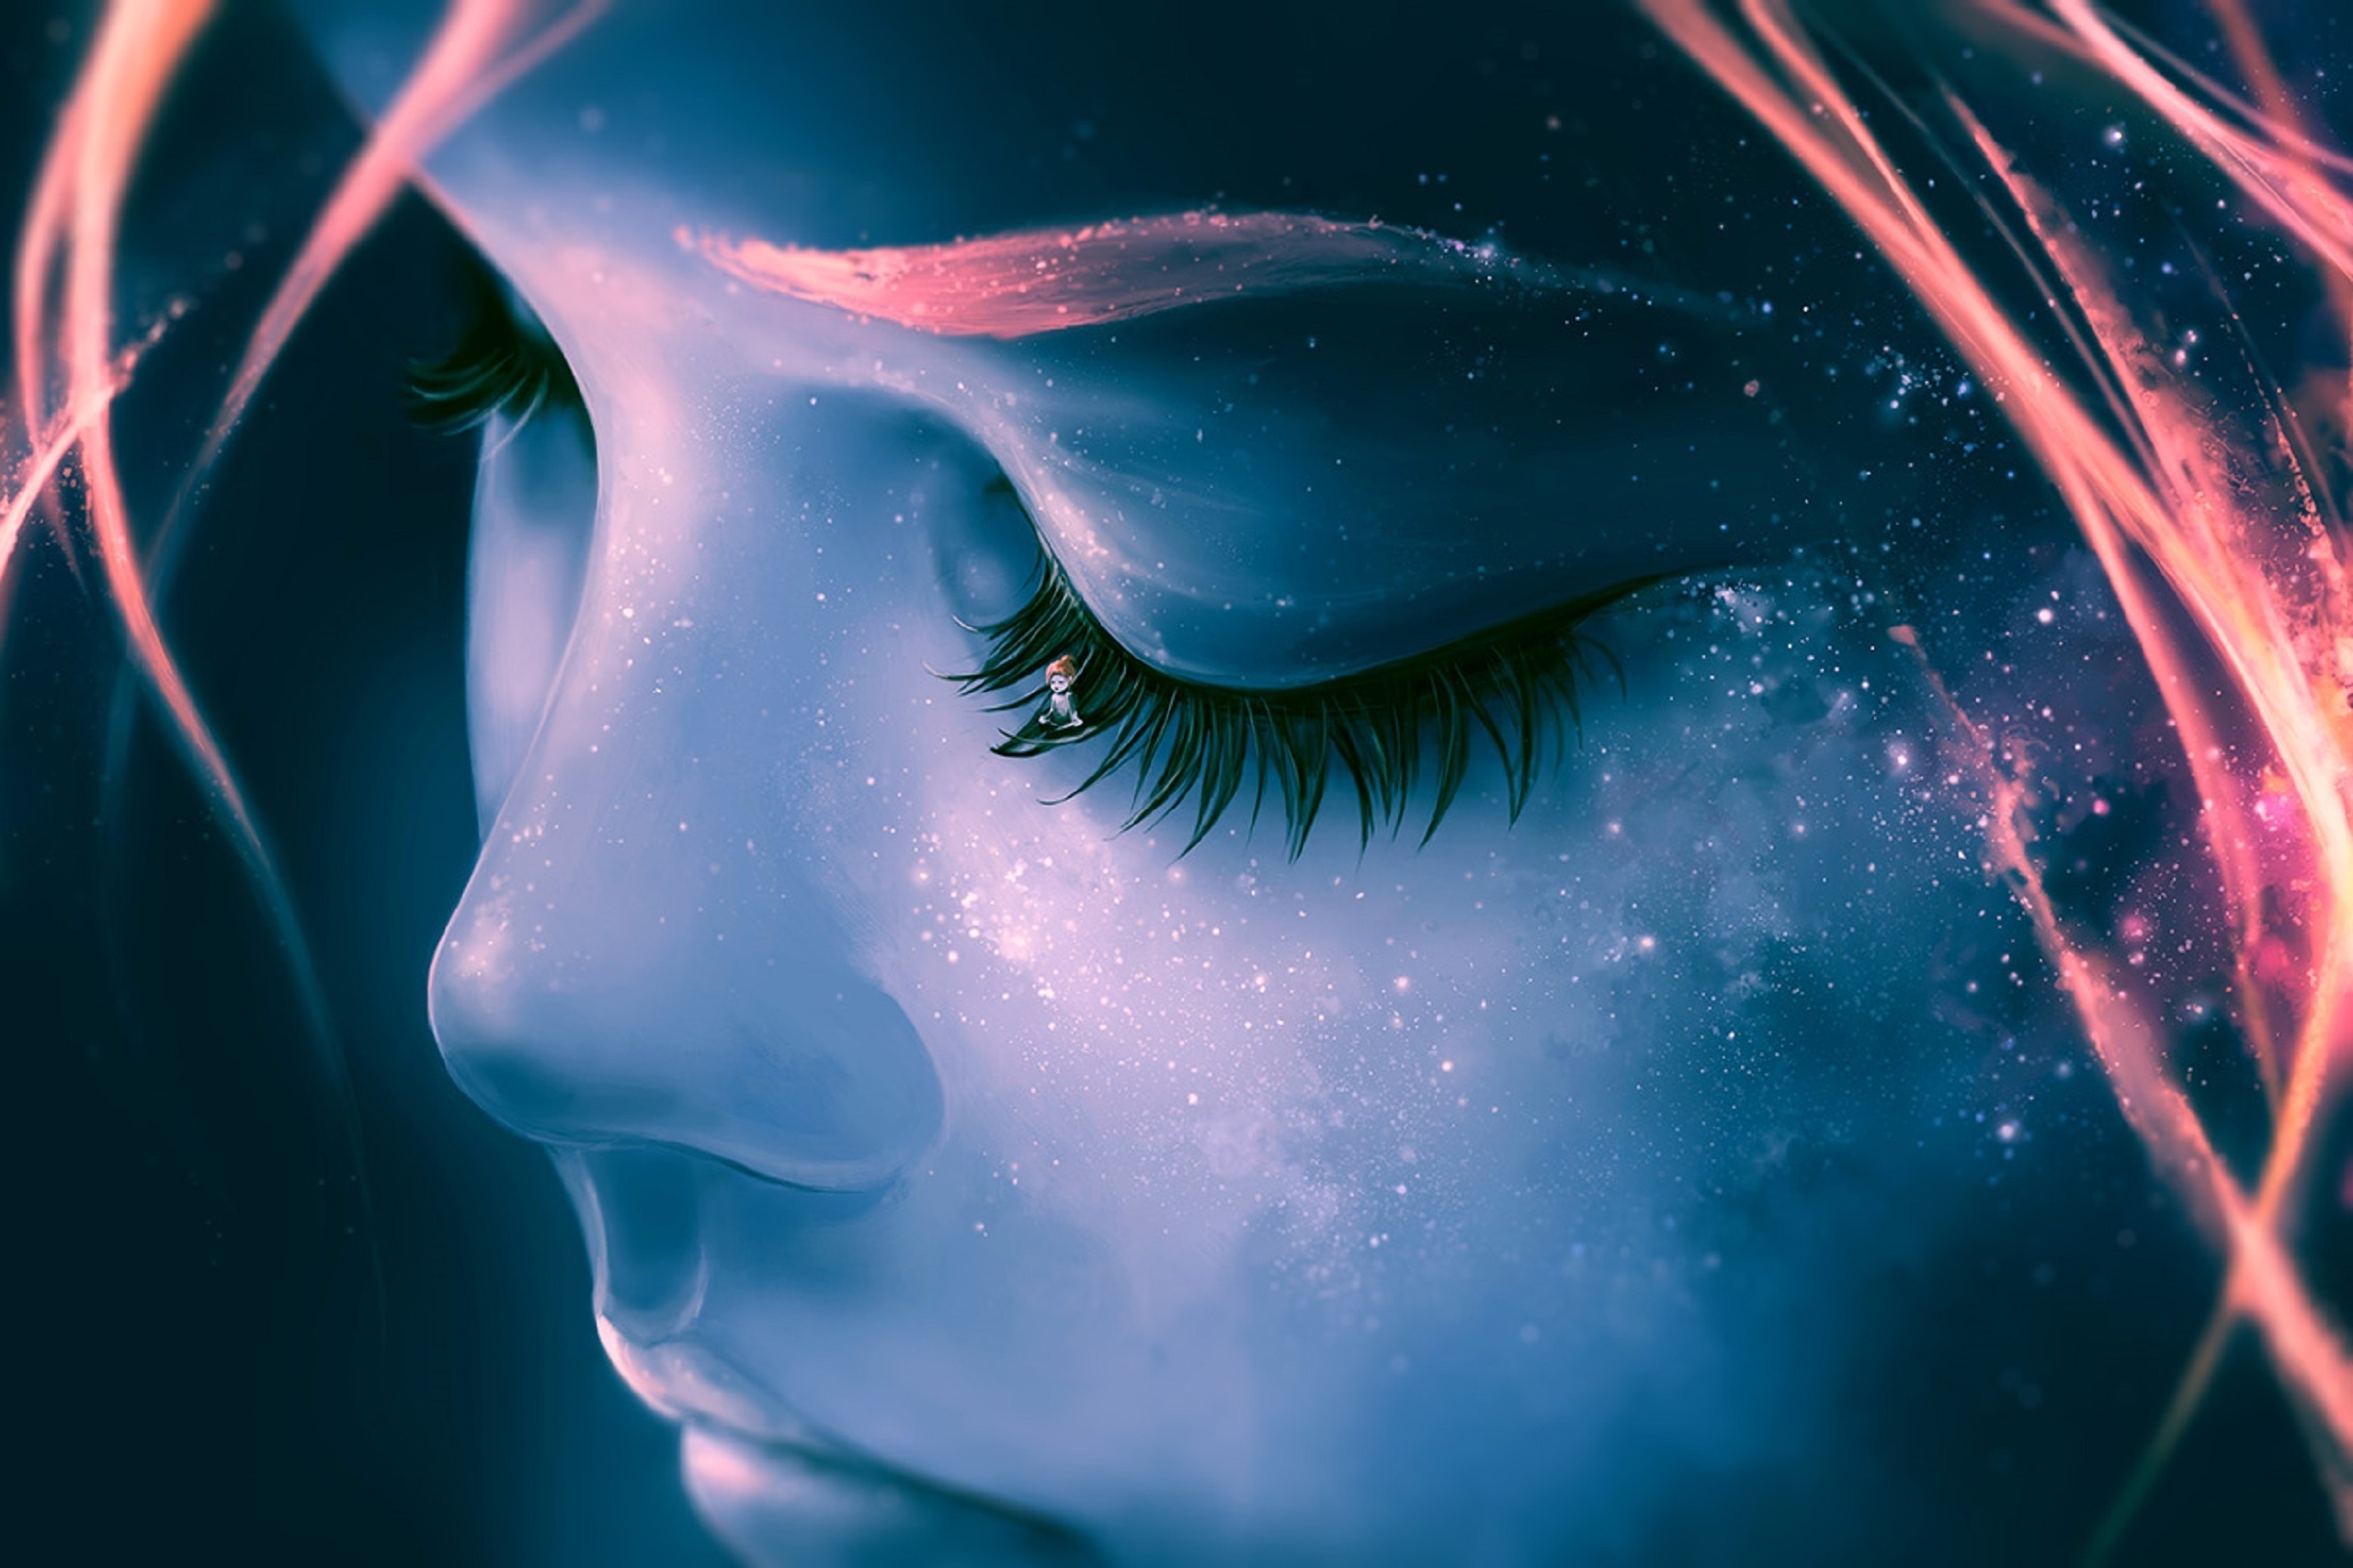 Women Artistic Child Girl Blue Stars Glow Fantasy Sad - Focus On Yourself By Cyril Rolando , HD Wallpaper & Backgrounds